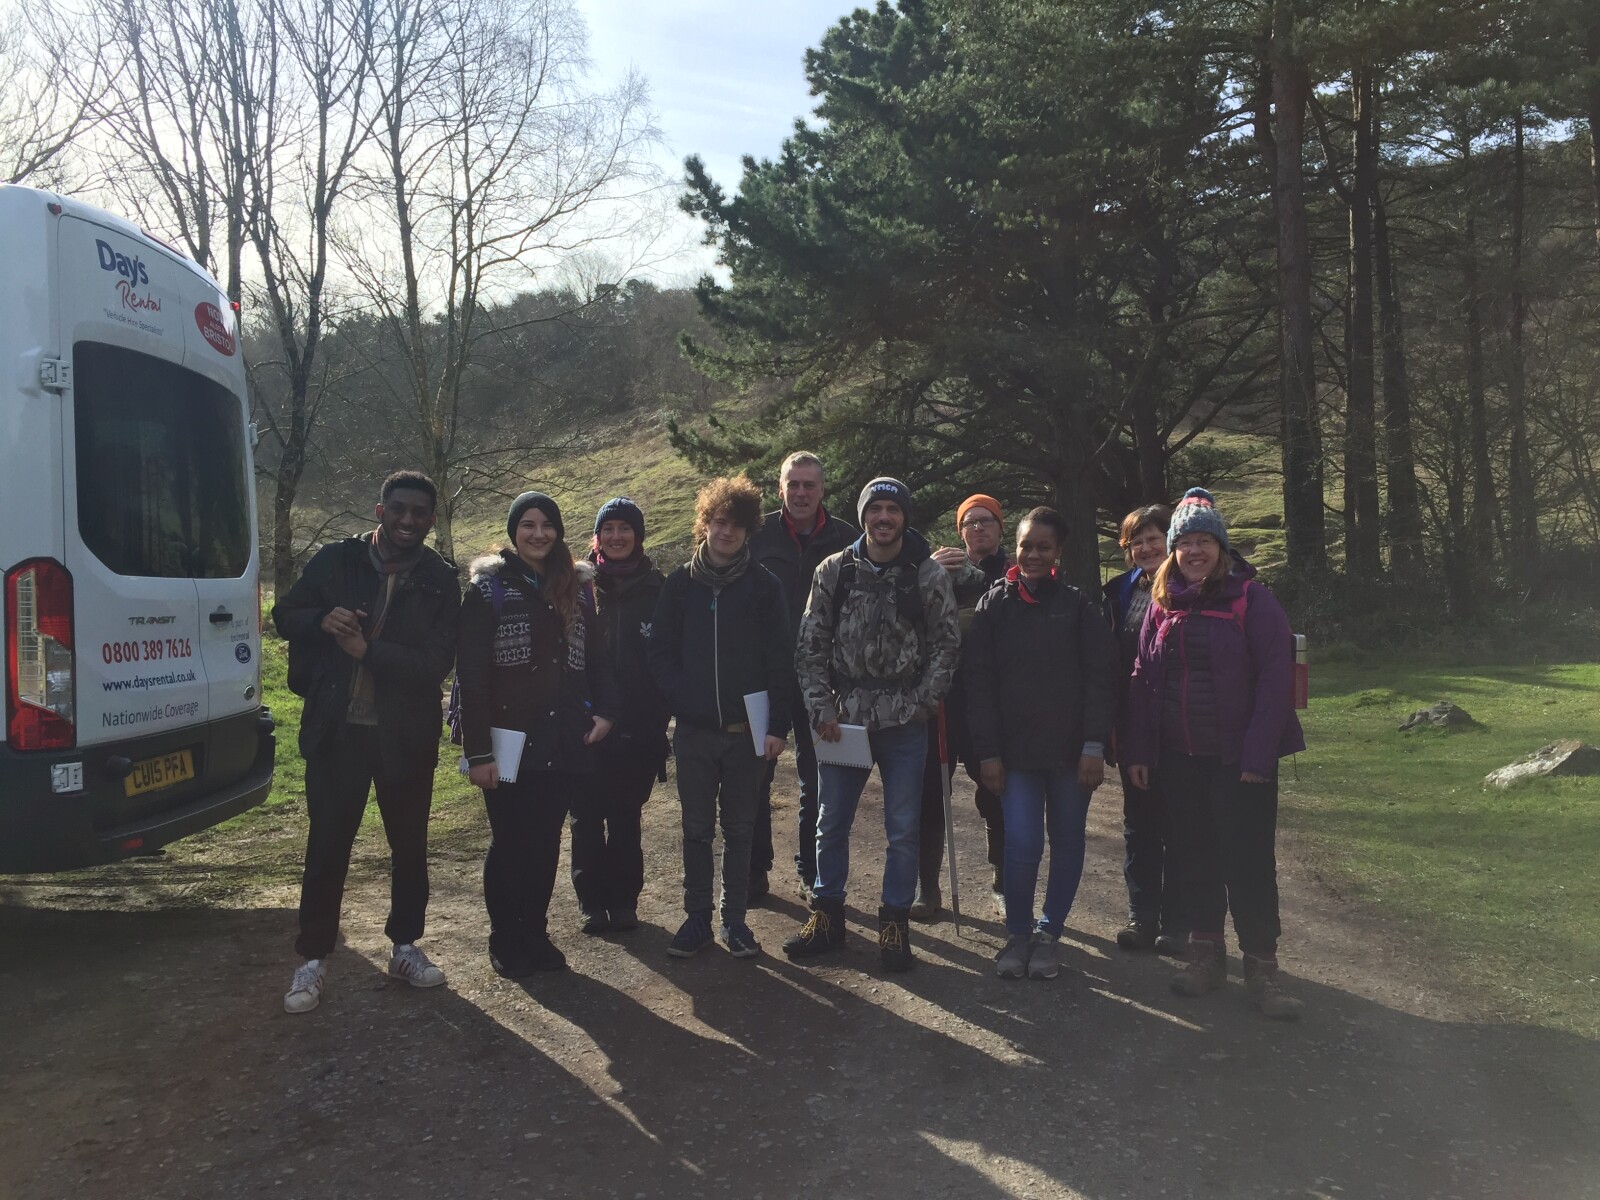 The images shows a variety of people at the bottom of a hill in a woodland area; they are about to go on a long walk. 